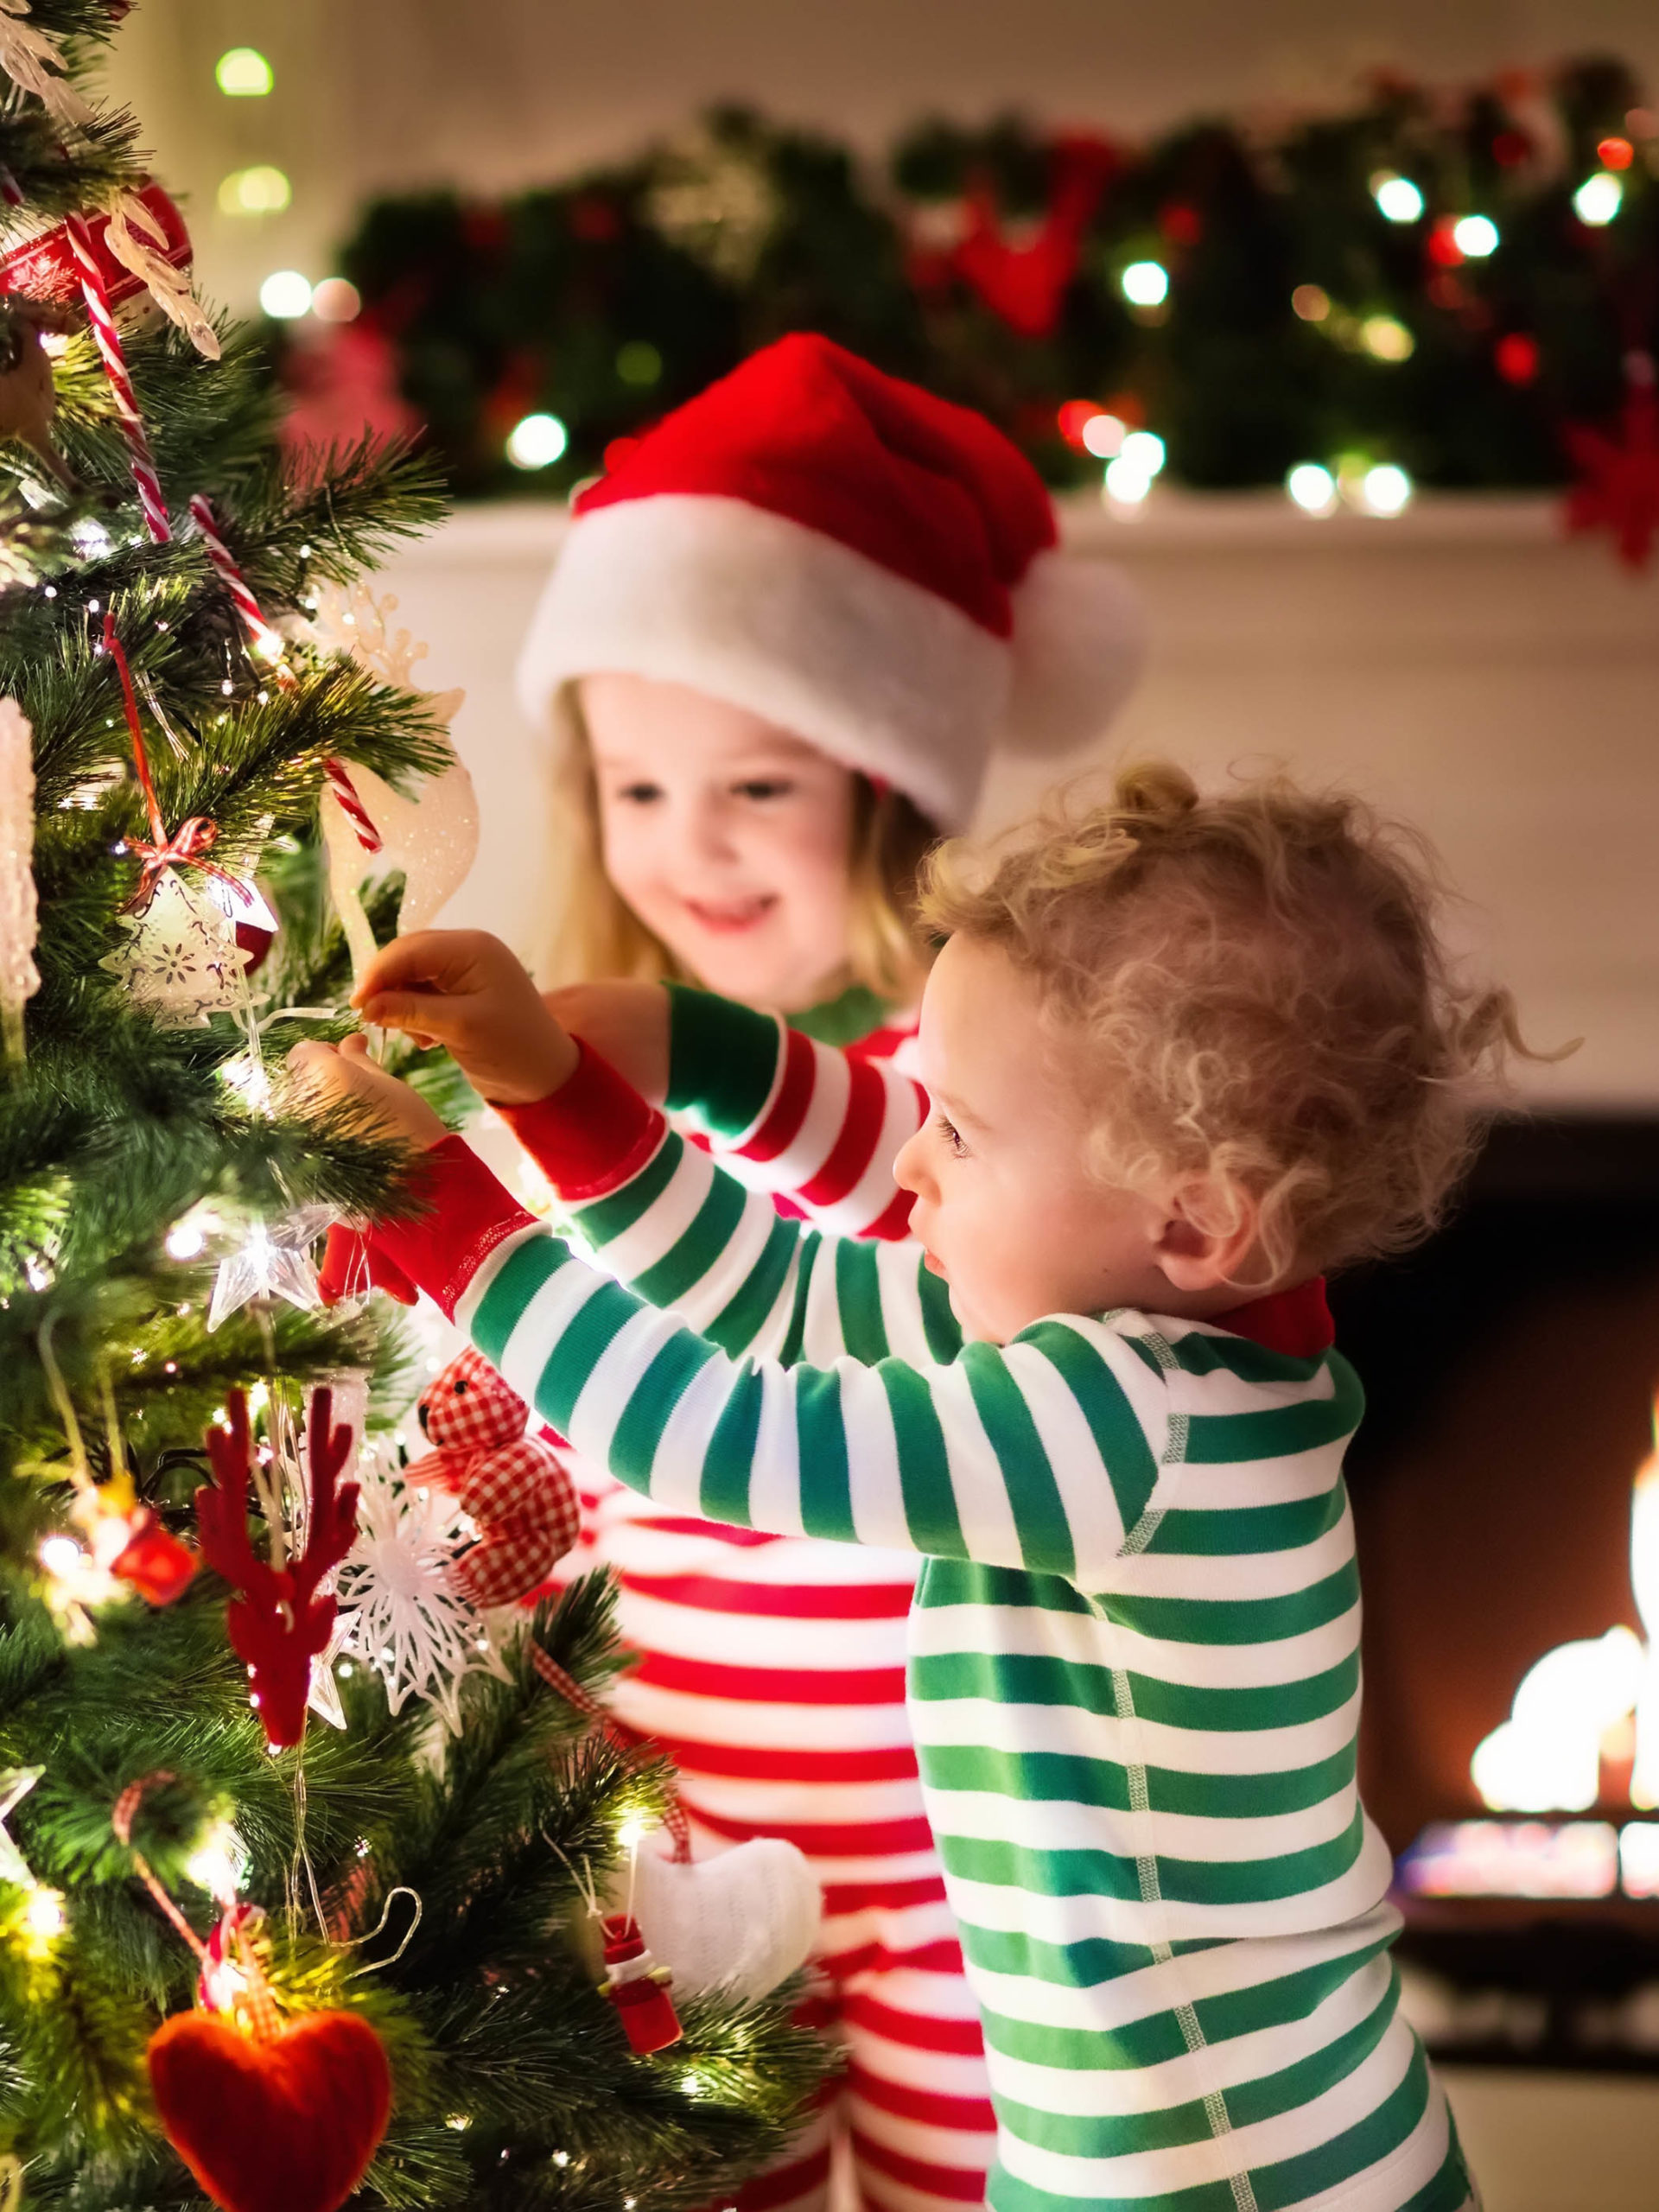 kids in matching red and green striped pajamas decorate Christmas tree